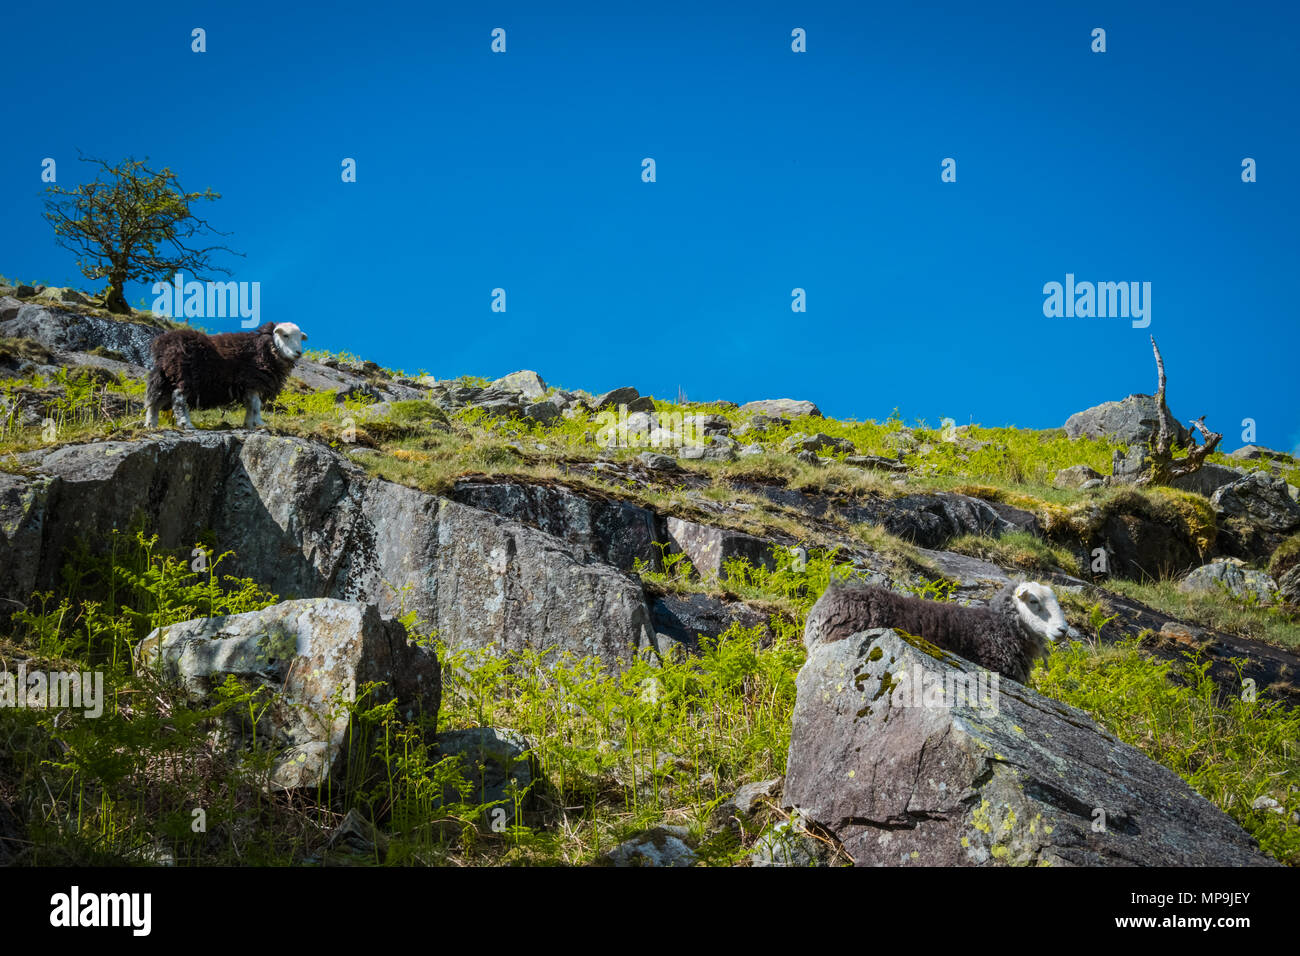 Mountain sheep lookout across the Cumbrian hillside in the Lake District, UK Stock Photo